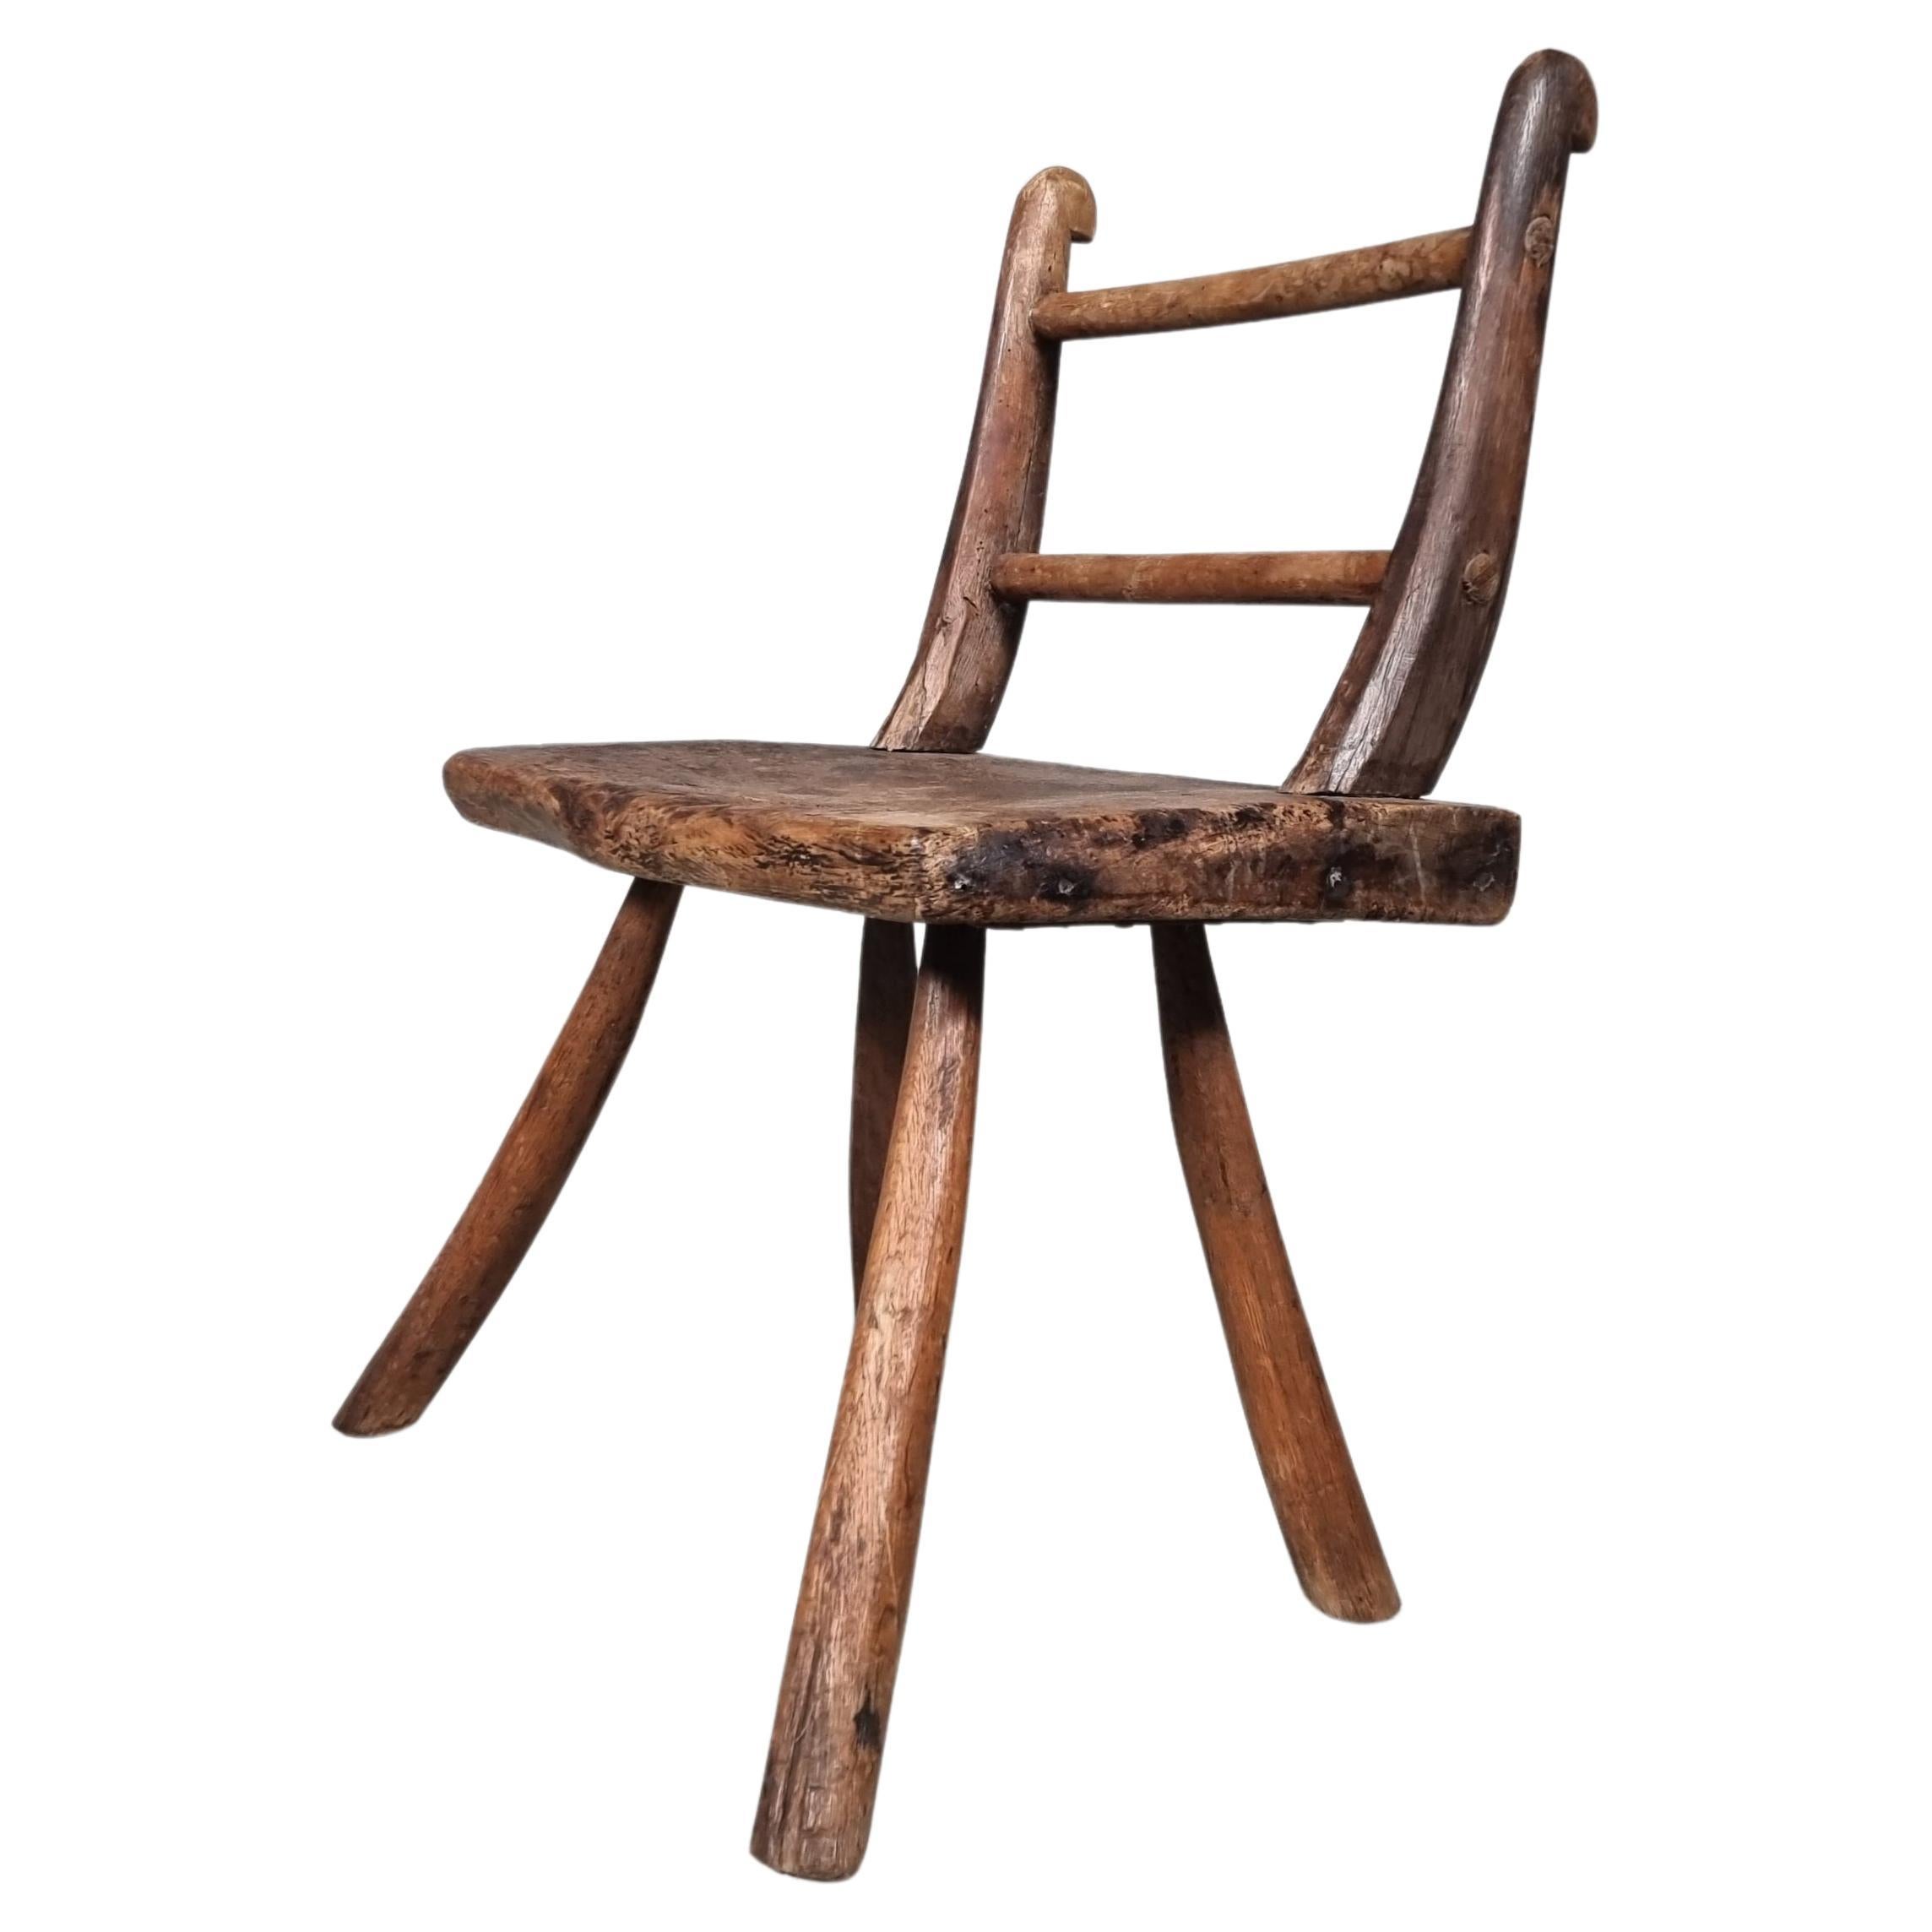 Rustic Wabi-Sabi Style Side Chair Constructed of Curved Dark Hardwood, 1900s